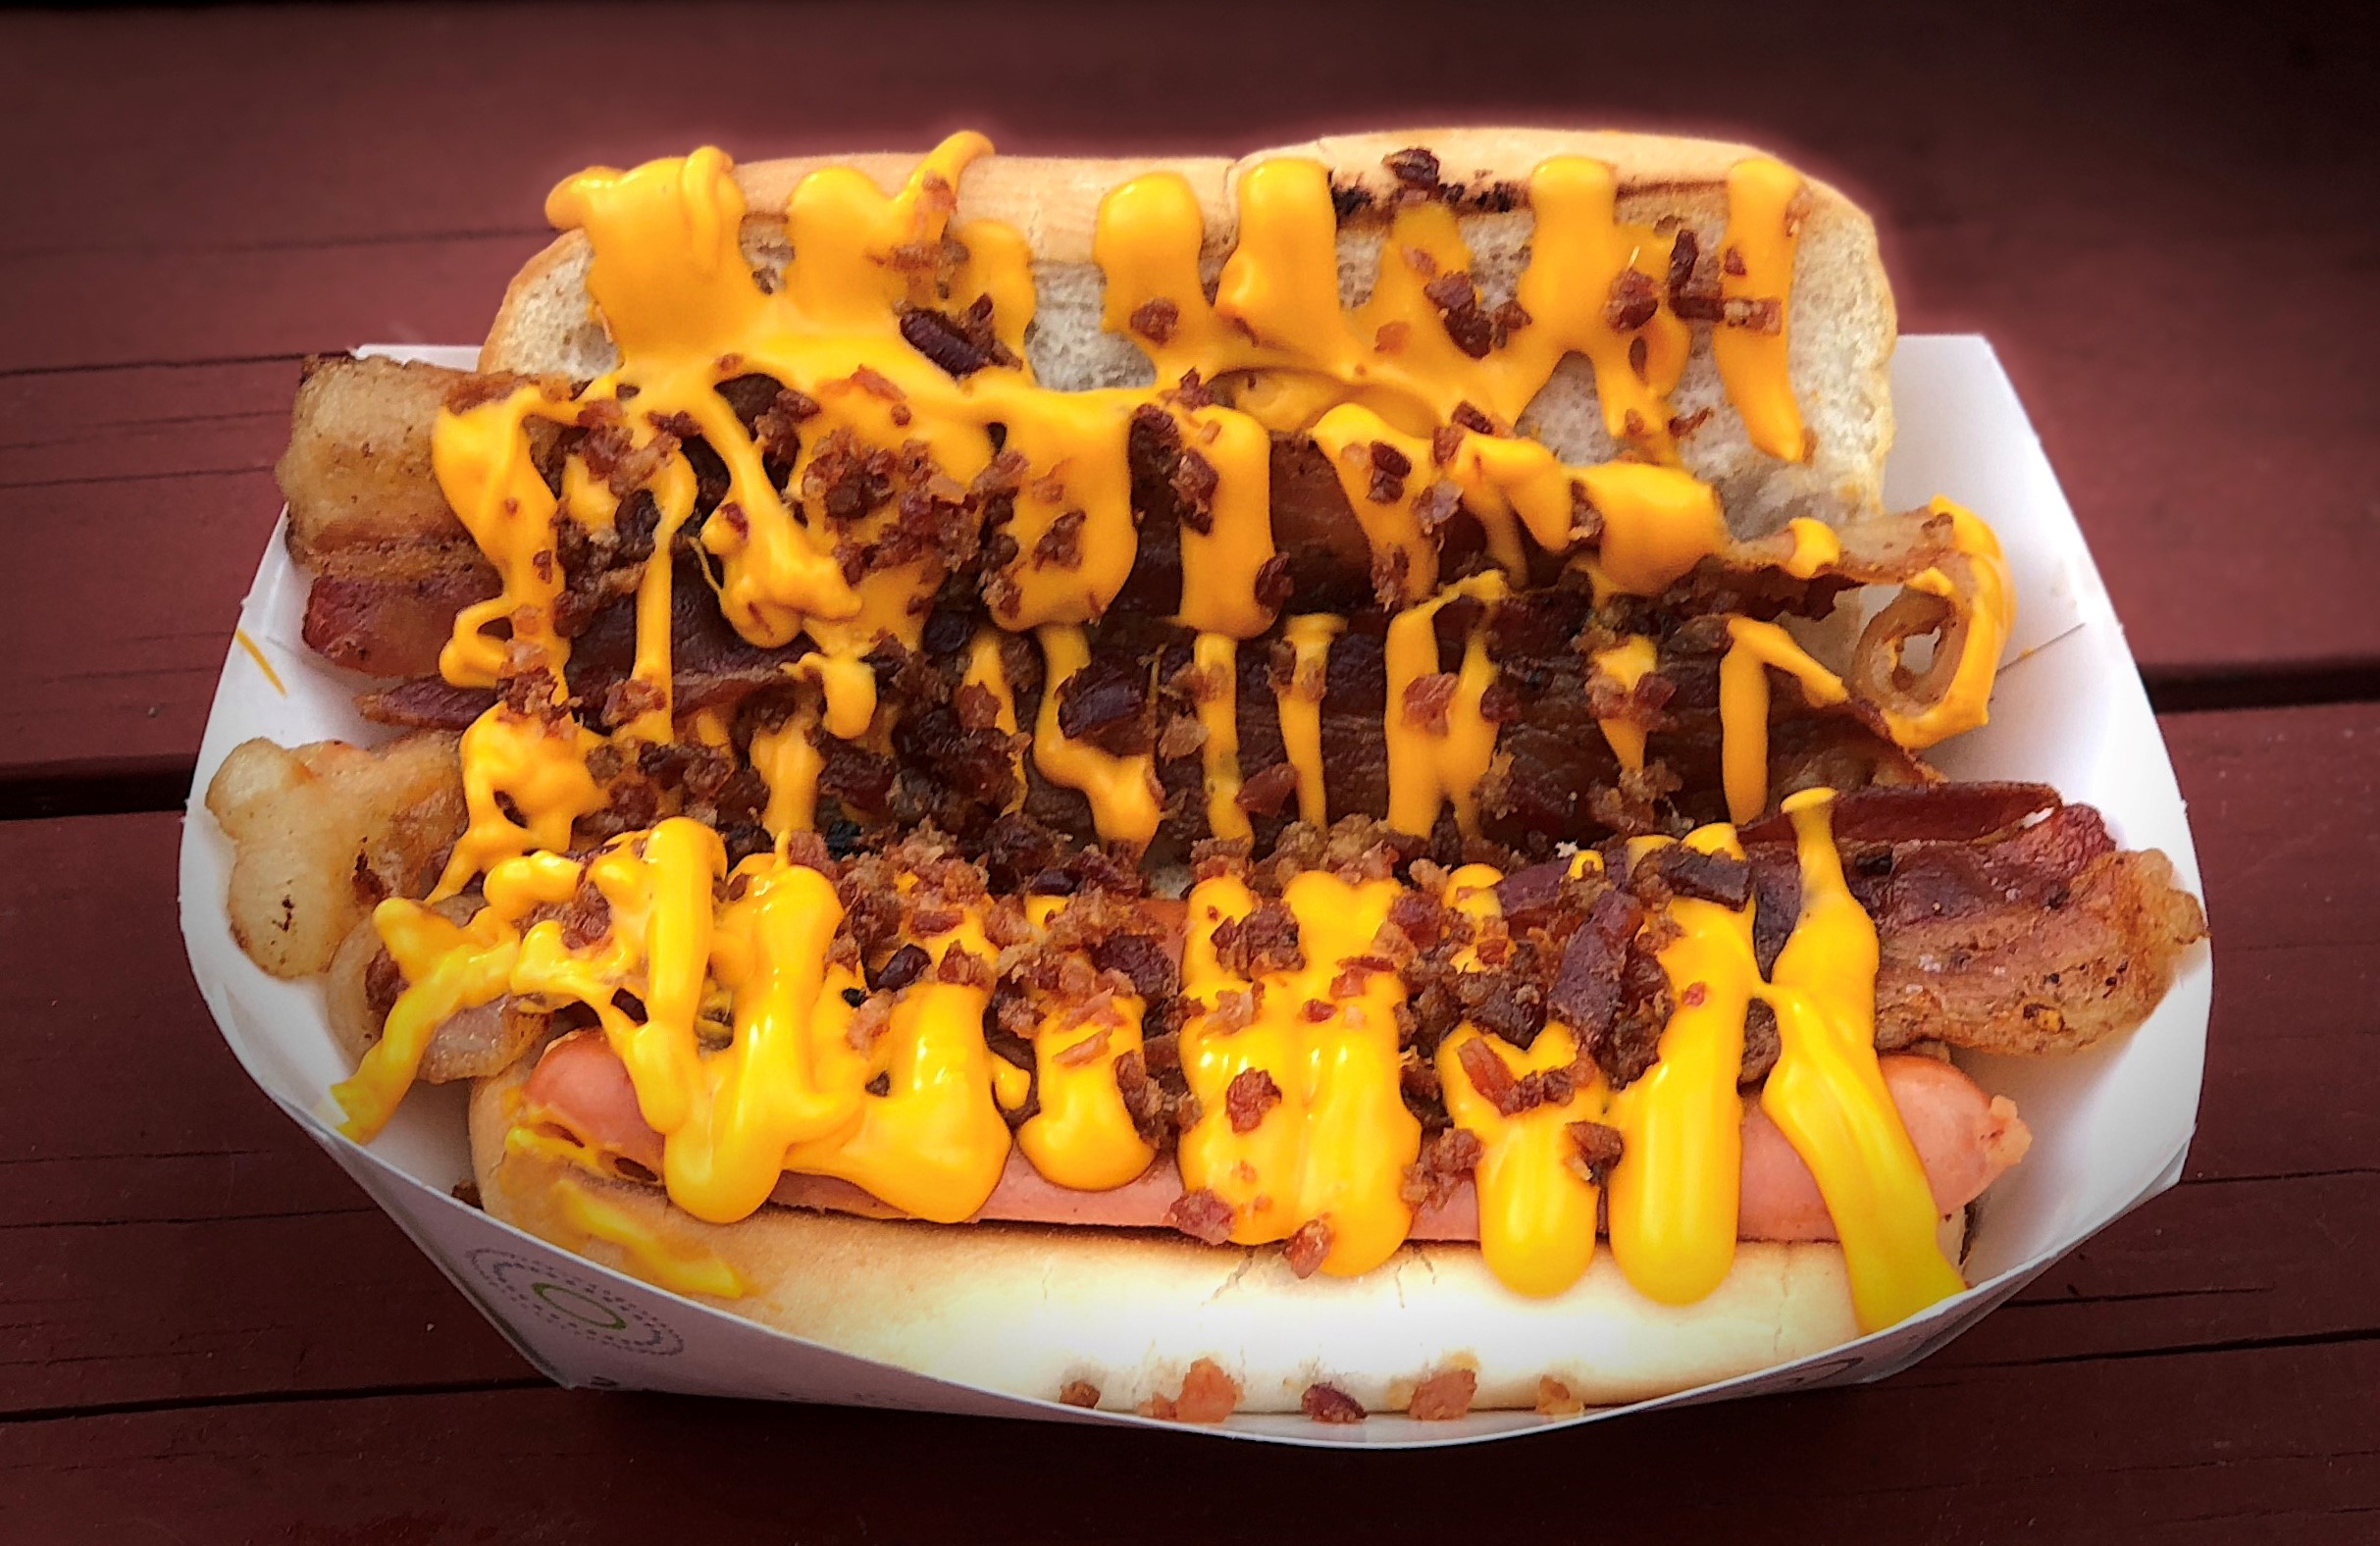 Pictured here:  Hog Dog Wiener featuring Bacon, Bacon, Bacon, Pepperoni, Cheese Sauce.